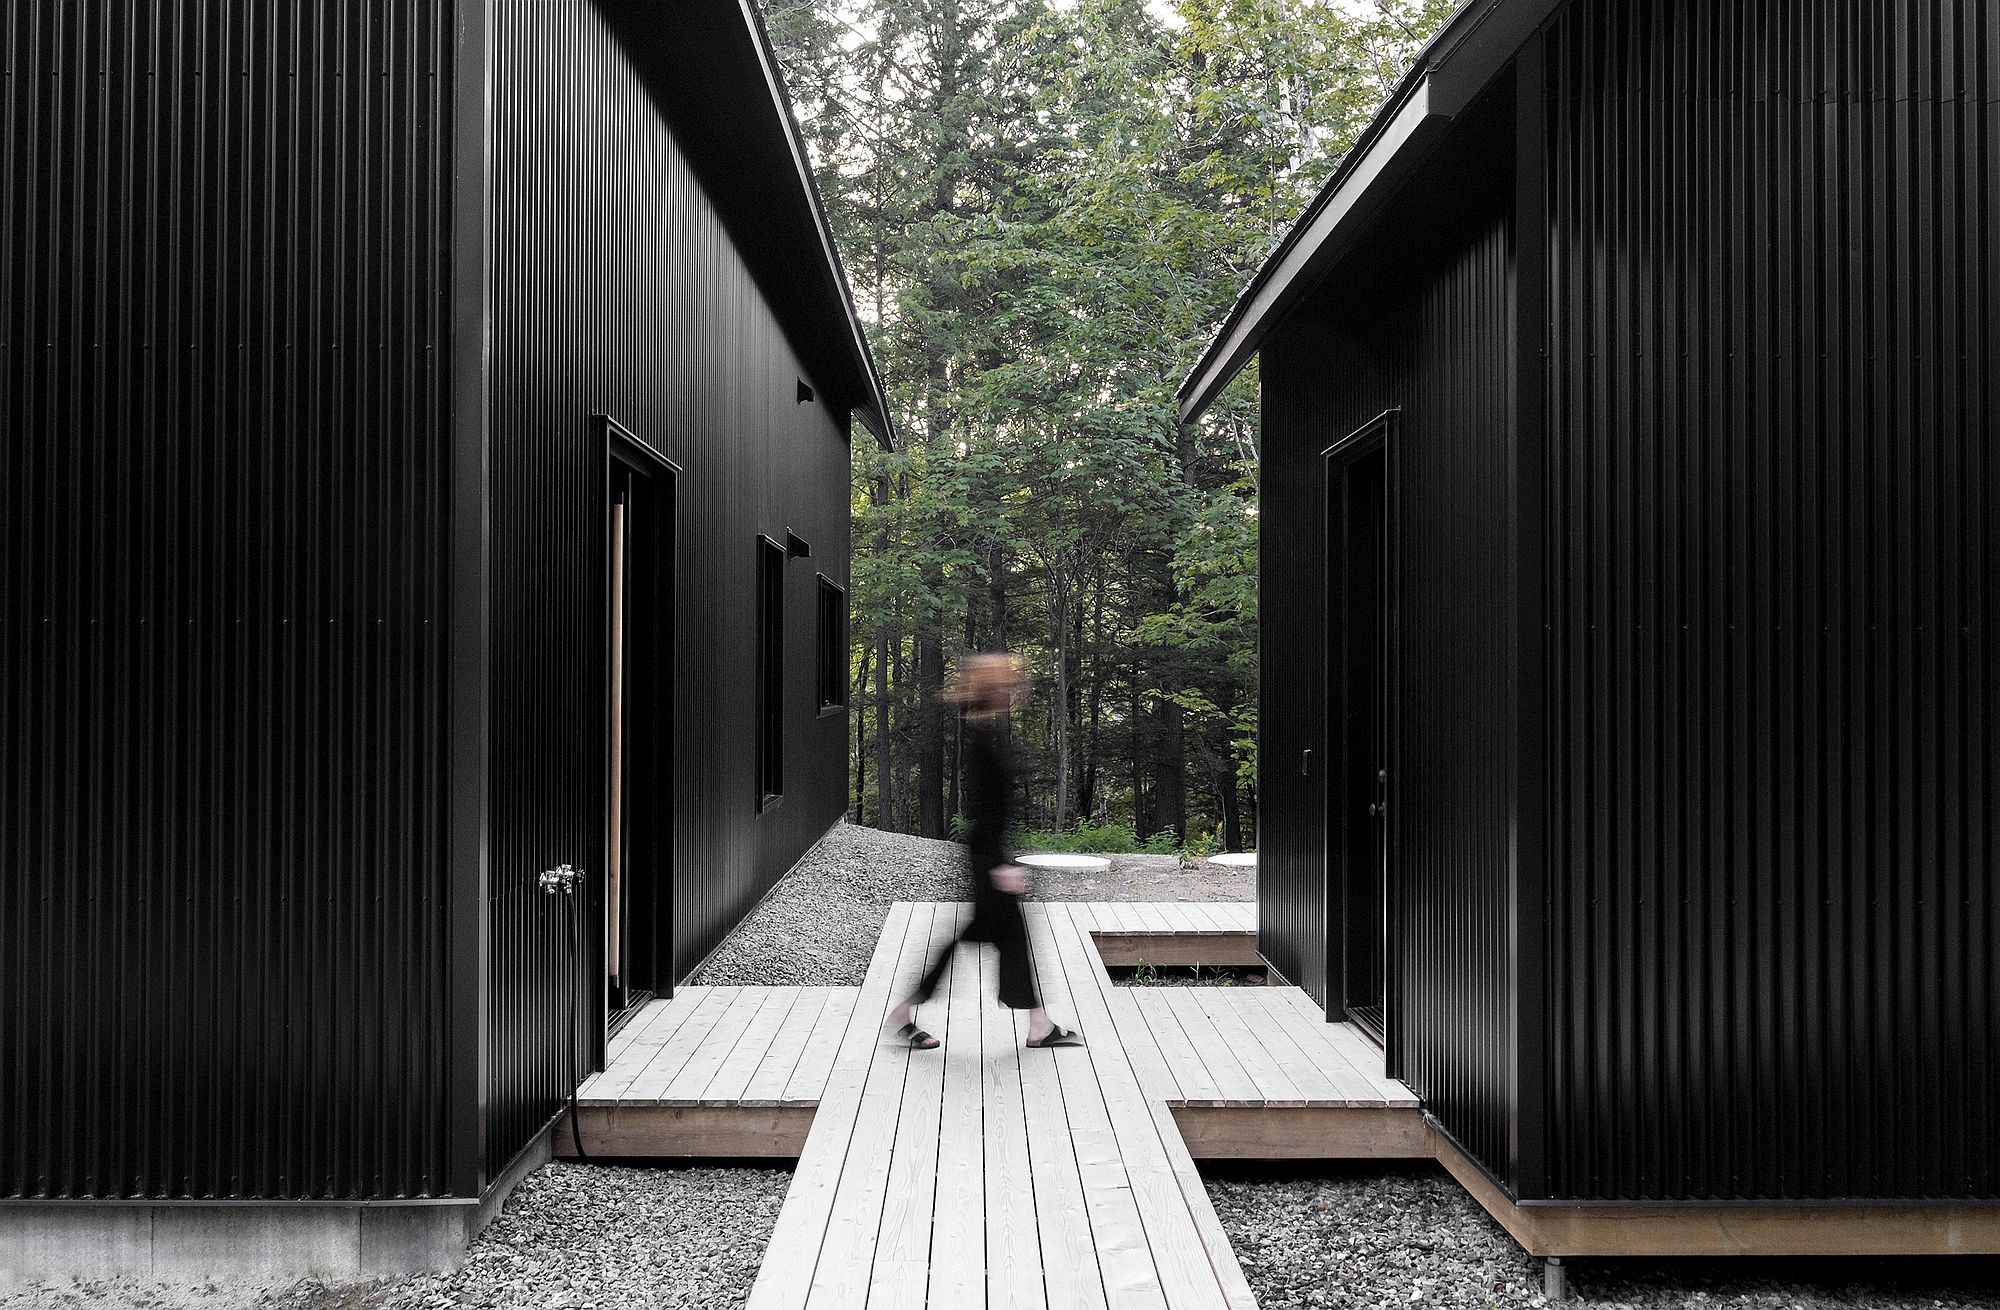 Wooden-deck-and-wlakway-connect-the-different-units-of-of-the-cabin